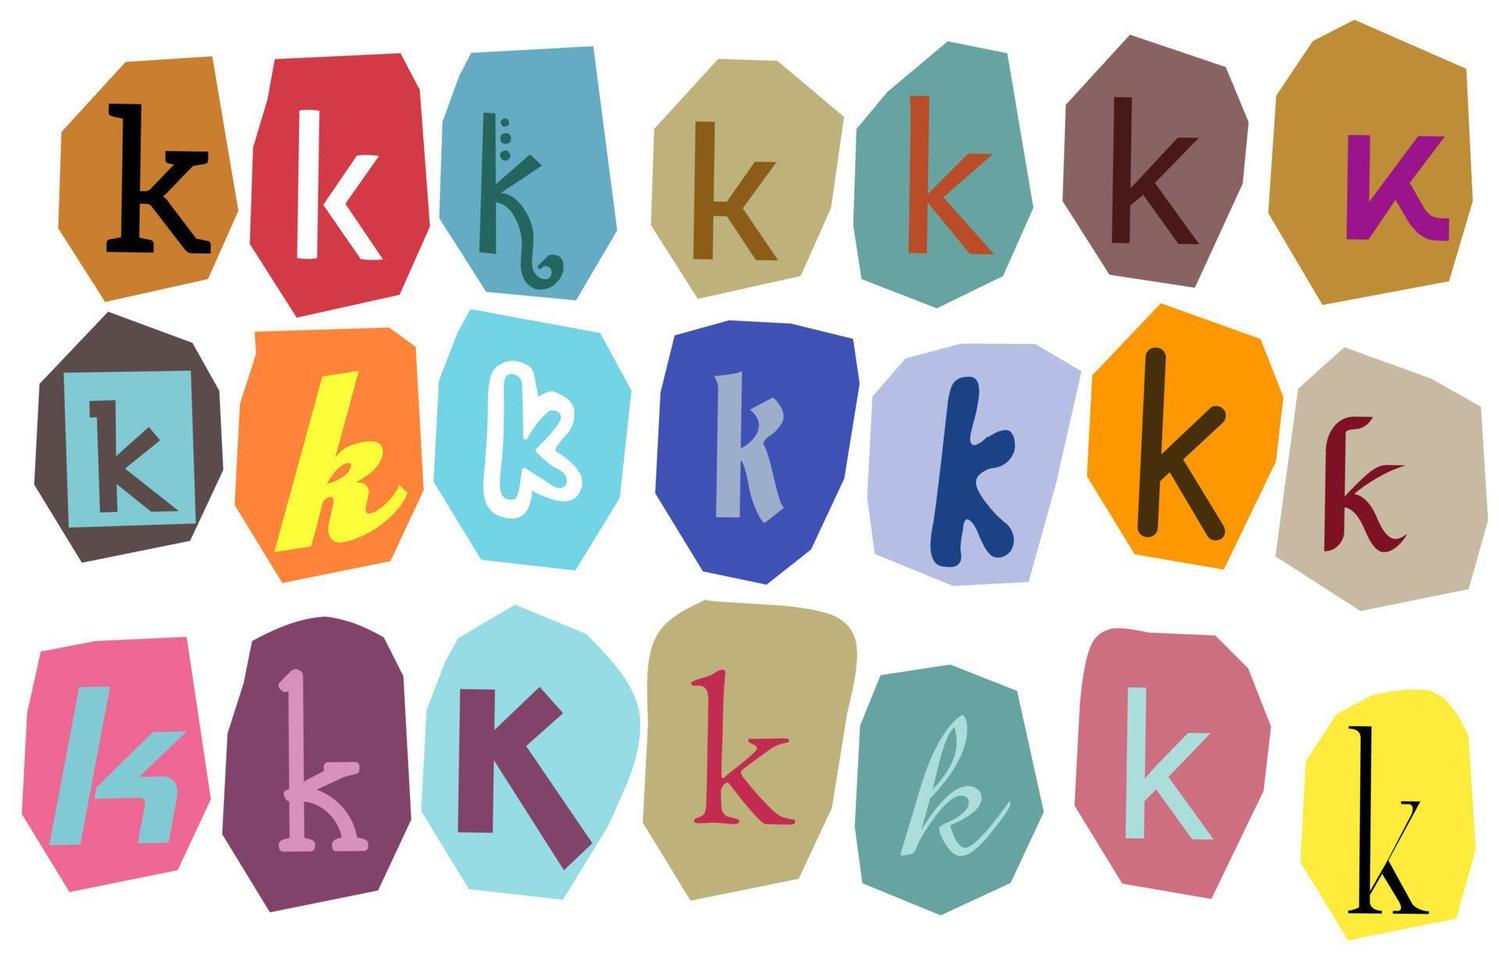 Alphabet k- vector cut newspaper and magazine letters, paper style ransom note letter